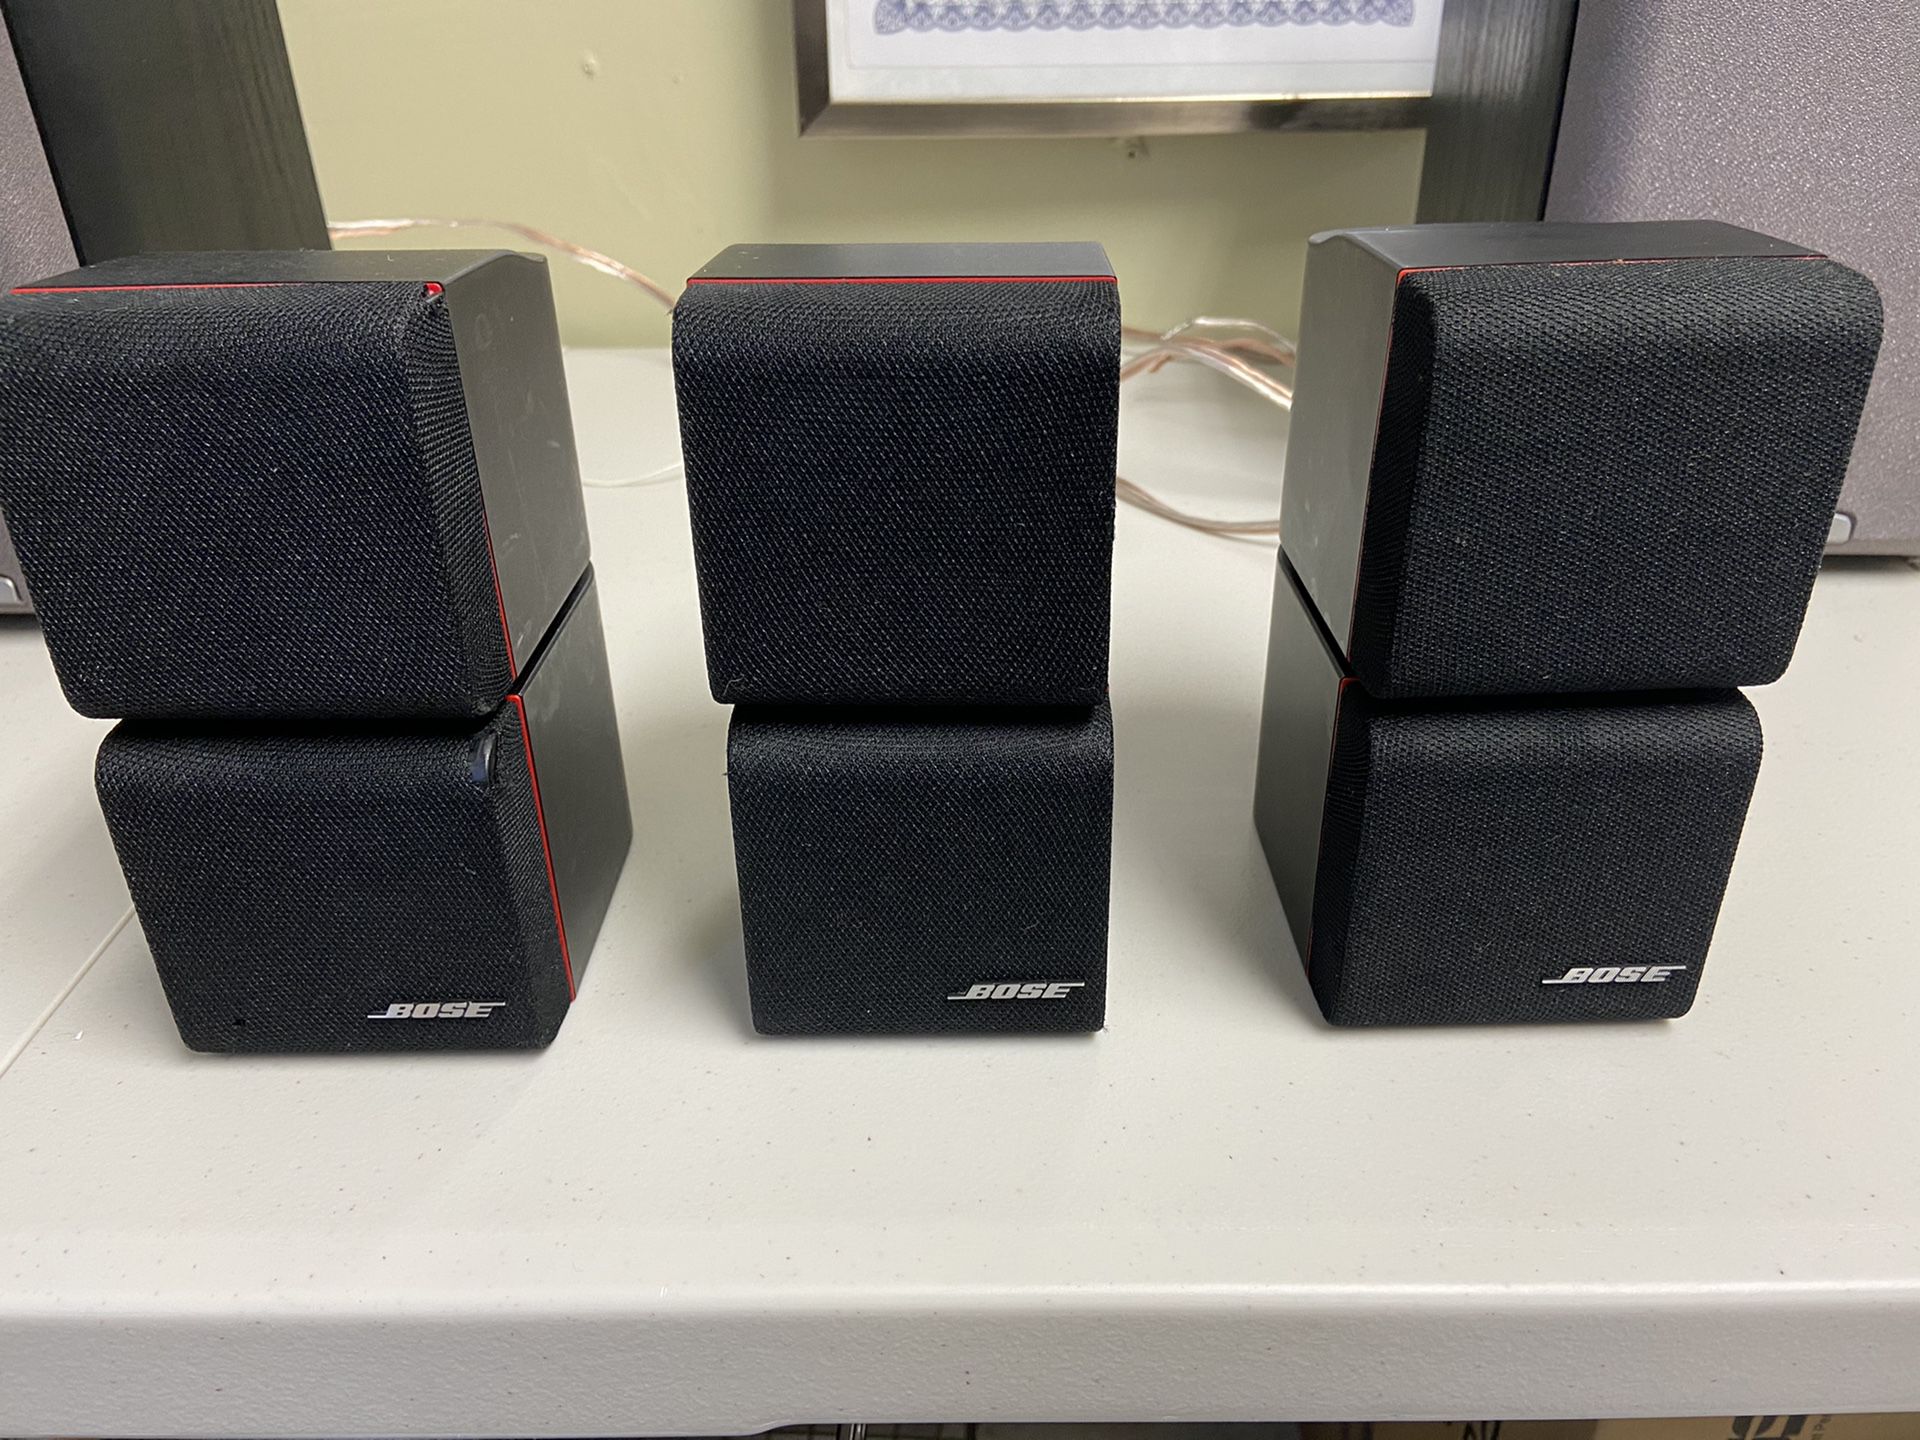 Bose double cube speakers redline in excellent condition.